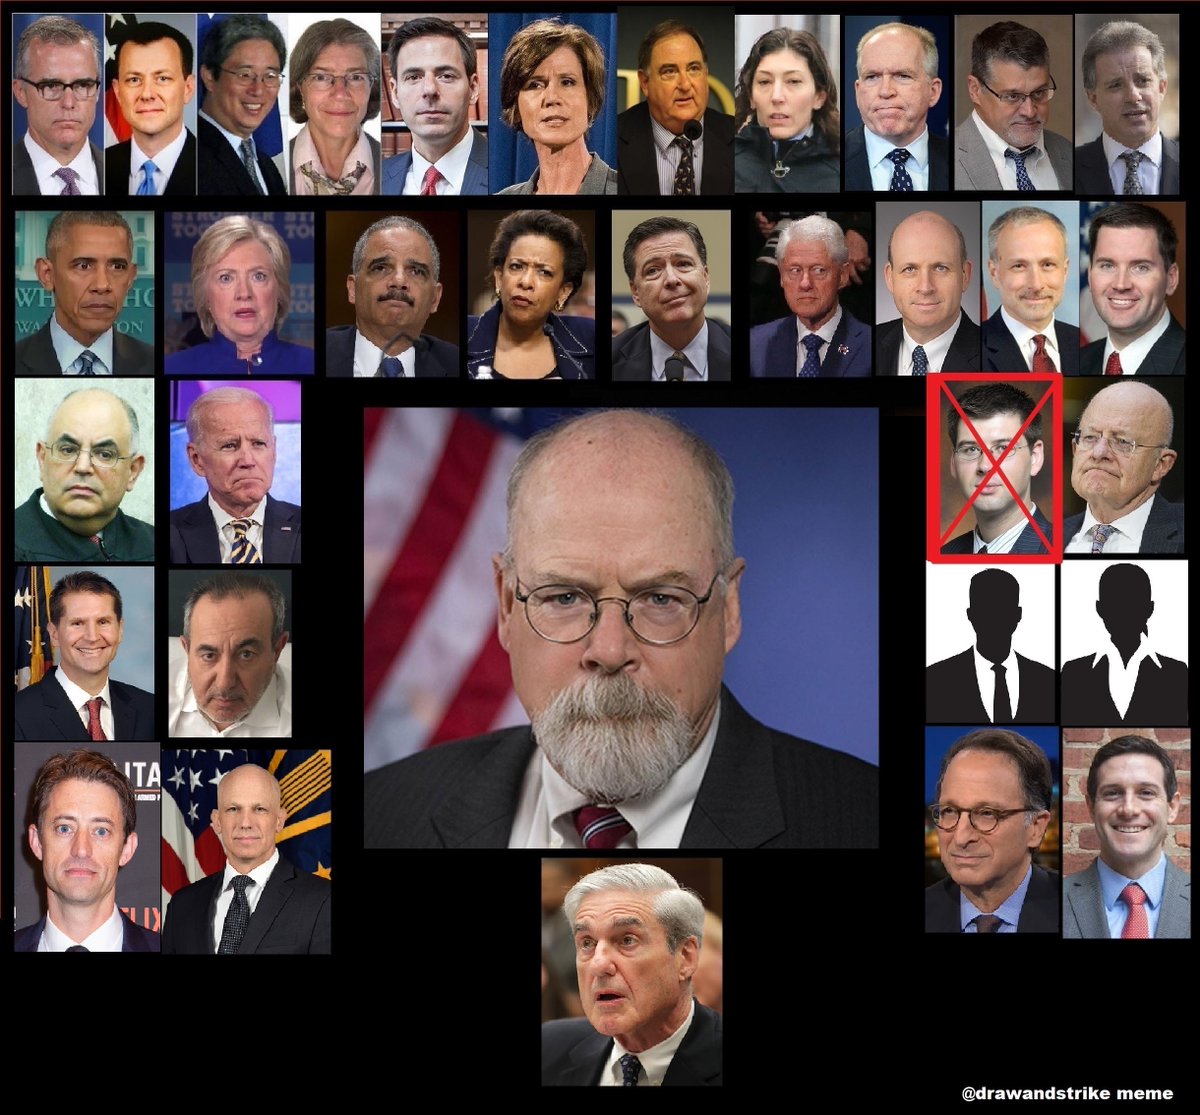 I smell indictments coming. Bill Barr and Special Counsel John Durham are going to shock the world. Bring it home, John.